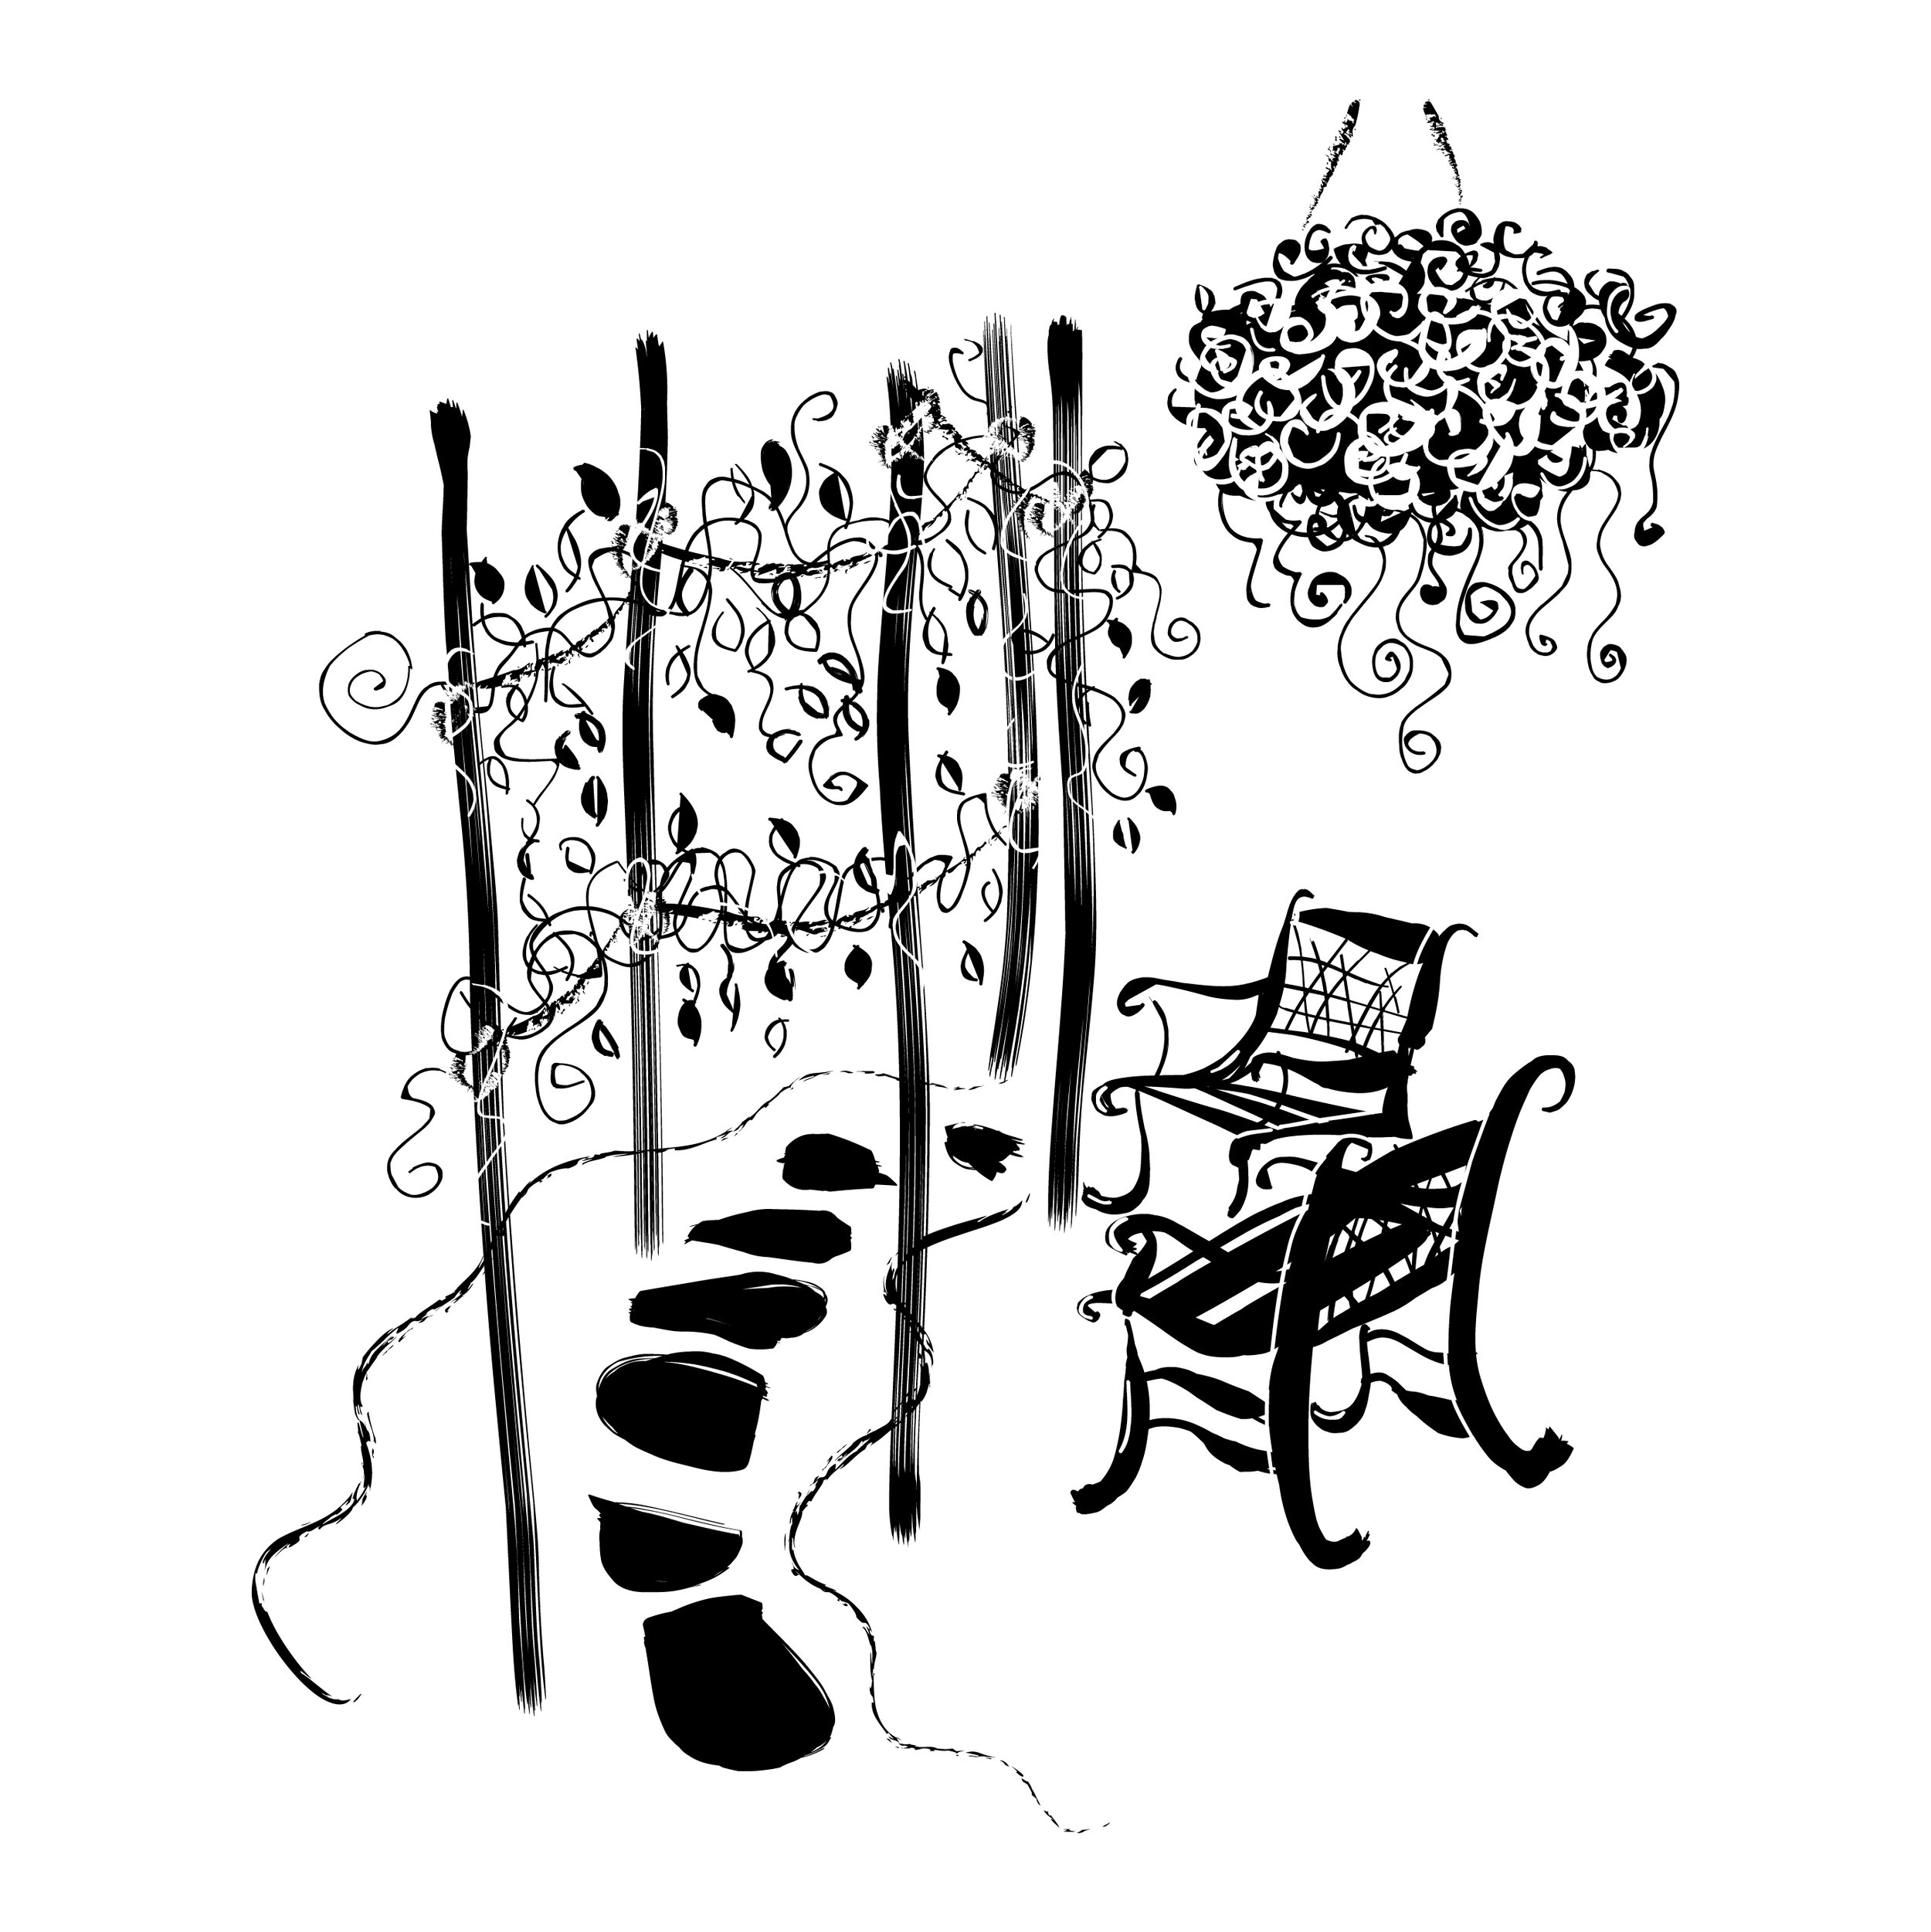 Line drawing of chairs along a rock pathway with hanging plant and trellis with vines